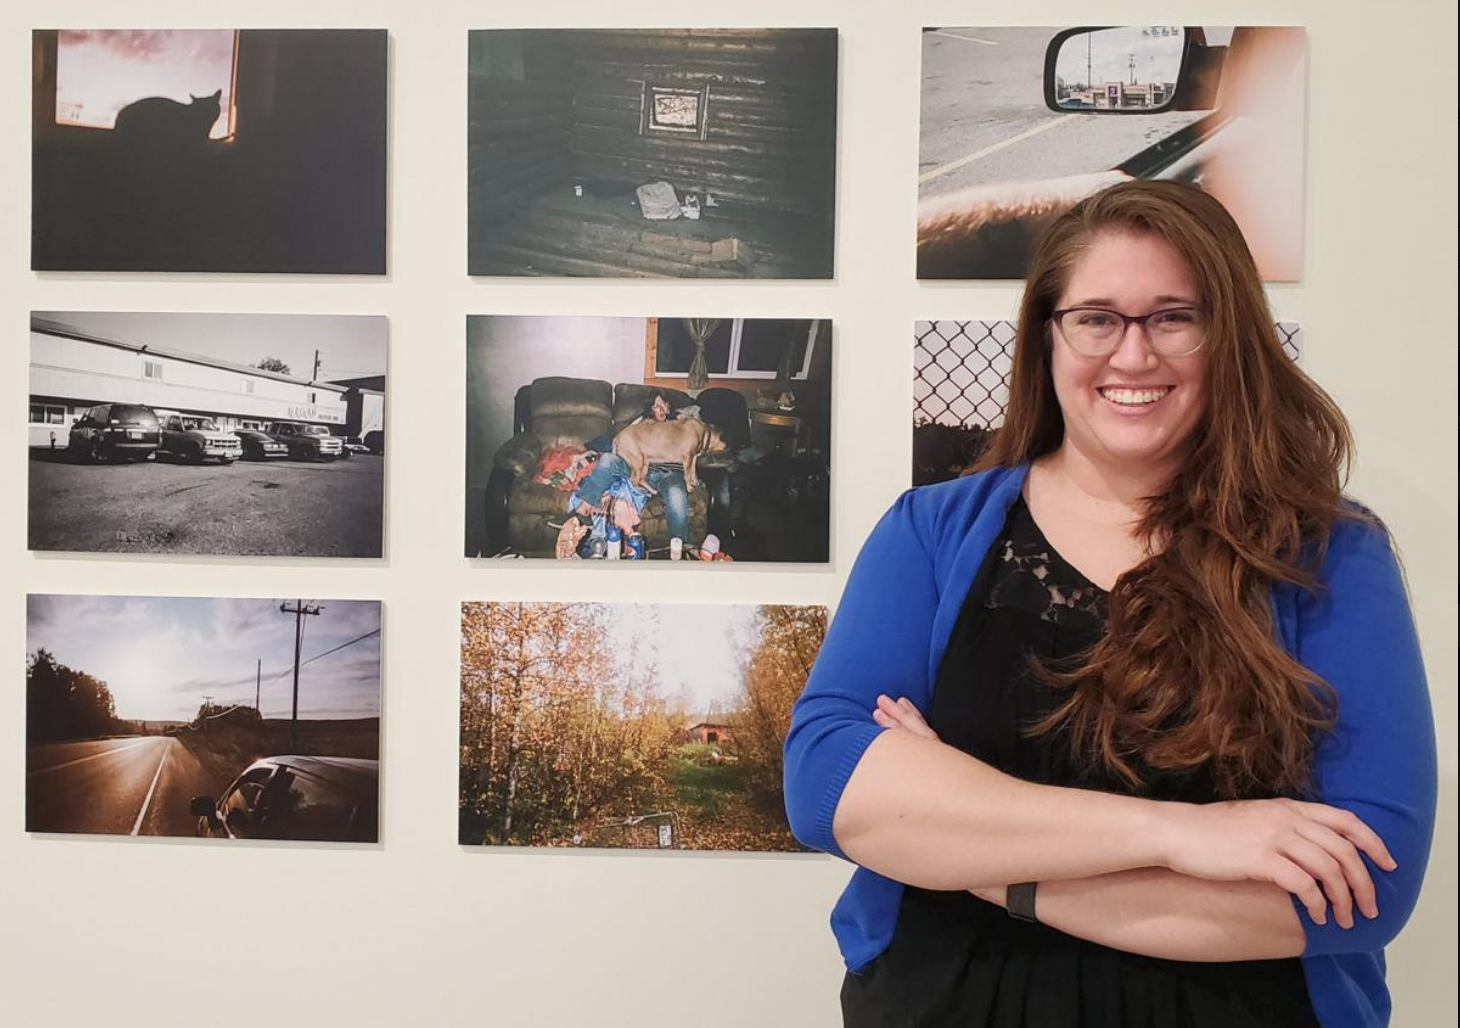  Sarah Manriquez’s photo project “Through Our Eyes” opens Friday at the Wandering Bear Gallery. Gary Black / Fairbanks Daily News Miner 